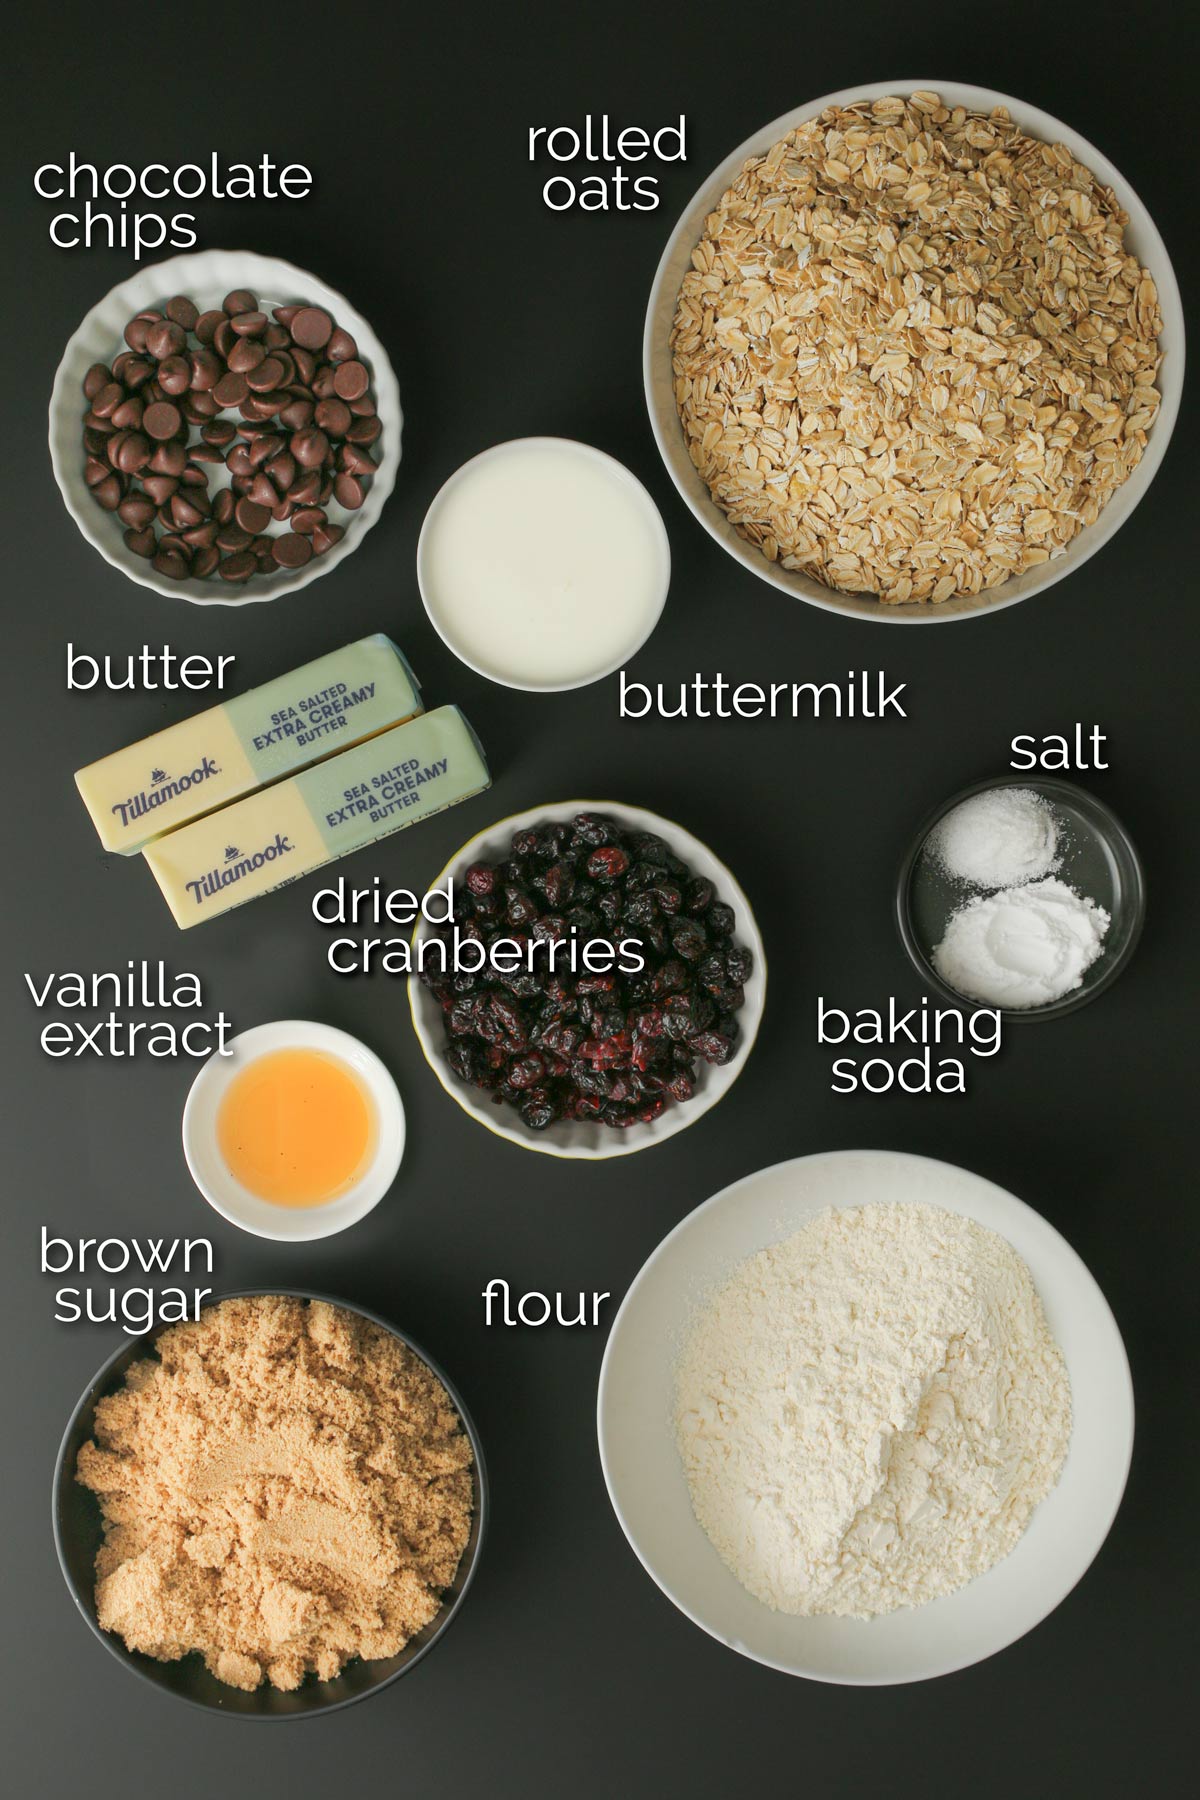 ingredients for Oatmeal Craisin Cookies laid out on a black table.